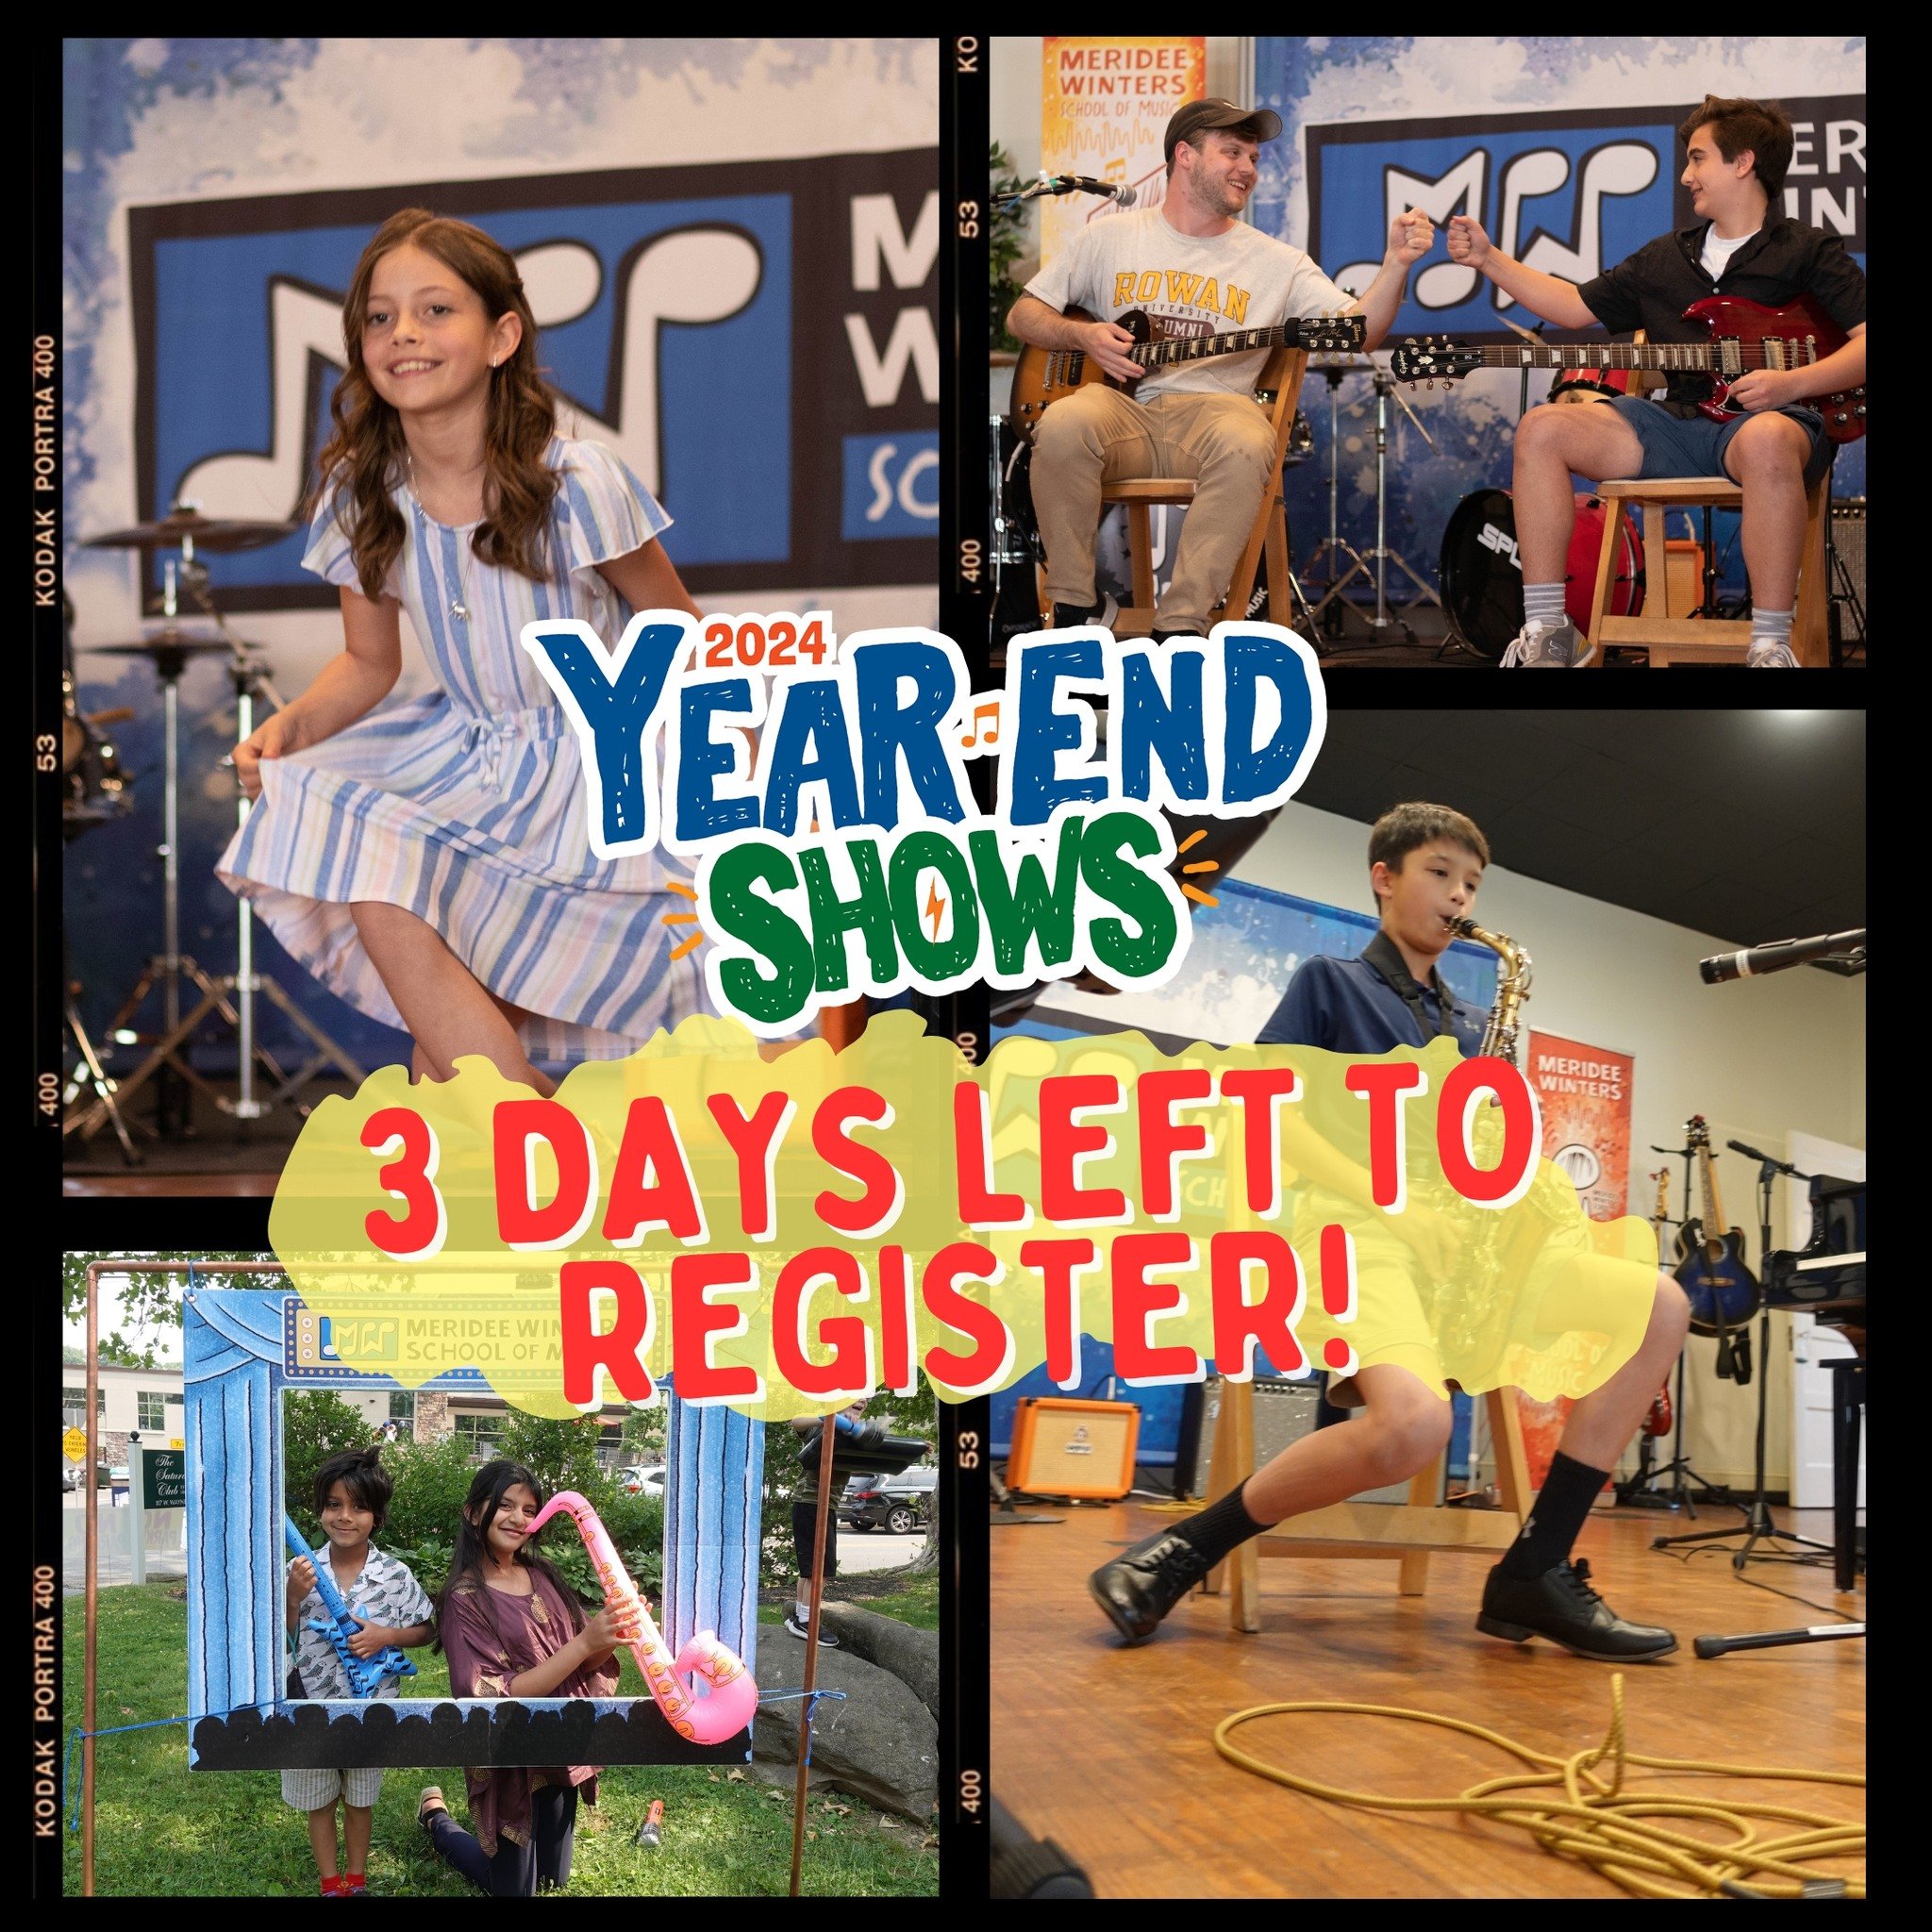 Spots are going fast for our Year End Shows. Register today! https://merideewinters.regfox.com/meridee-winters-2024-year-end-shows